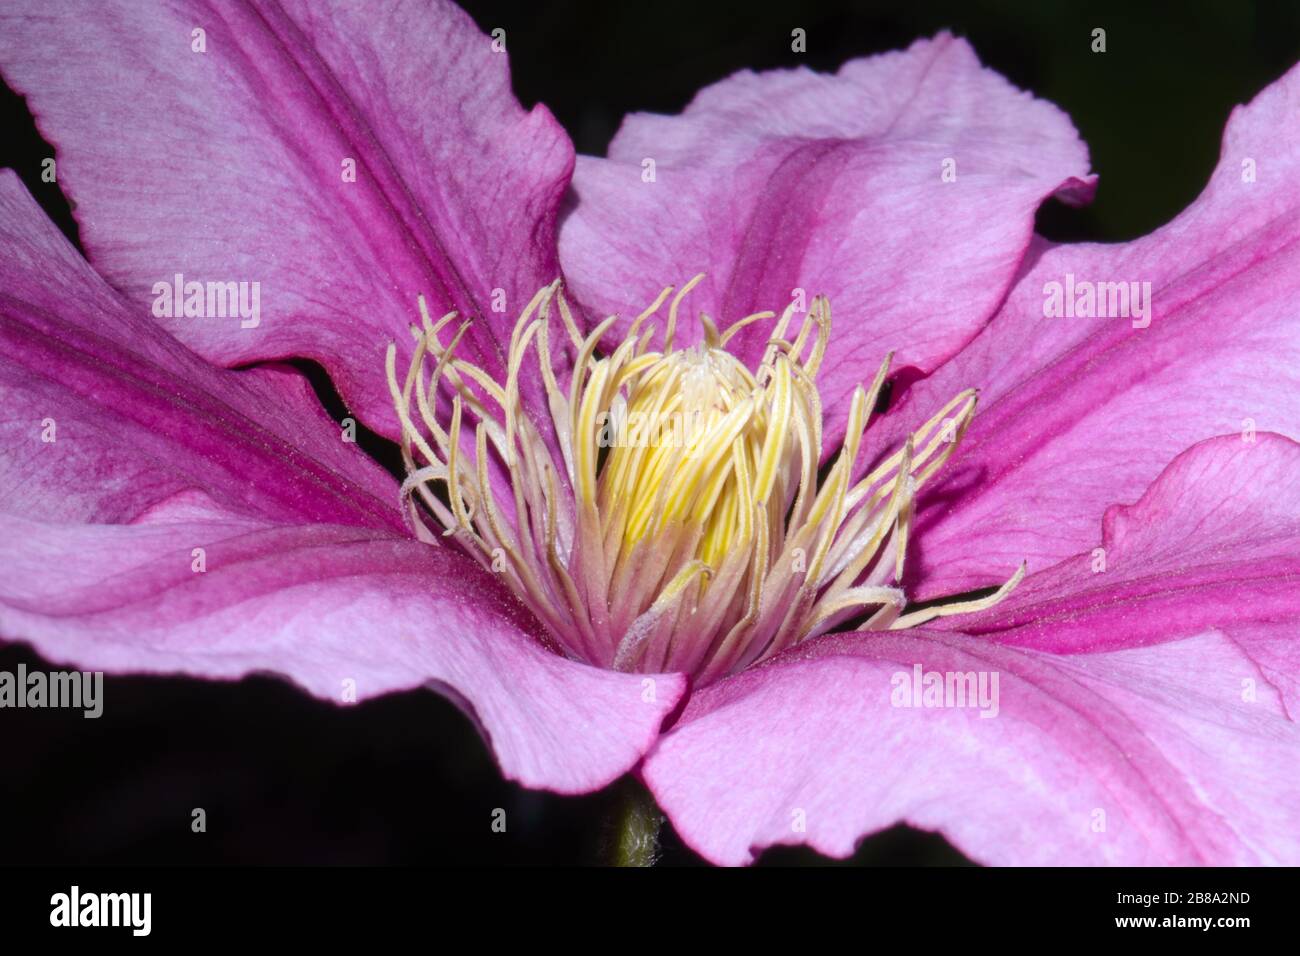 Brilliant two-tone pink, full frame image of flower with long yellow stamen. Stock Photo